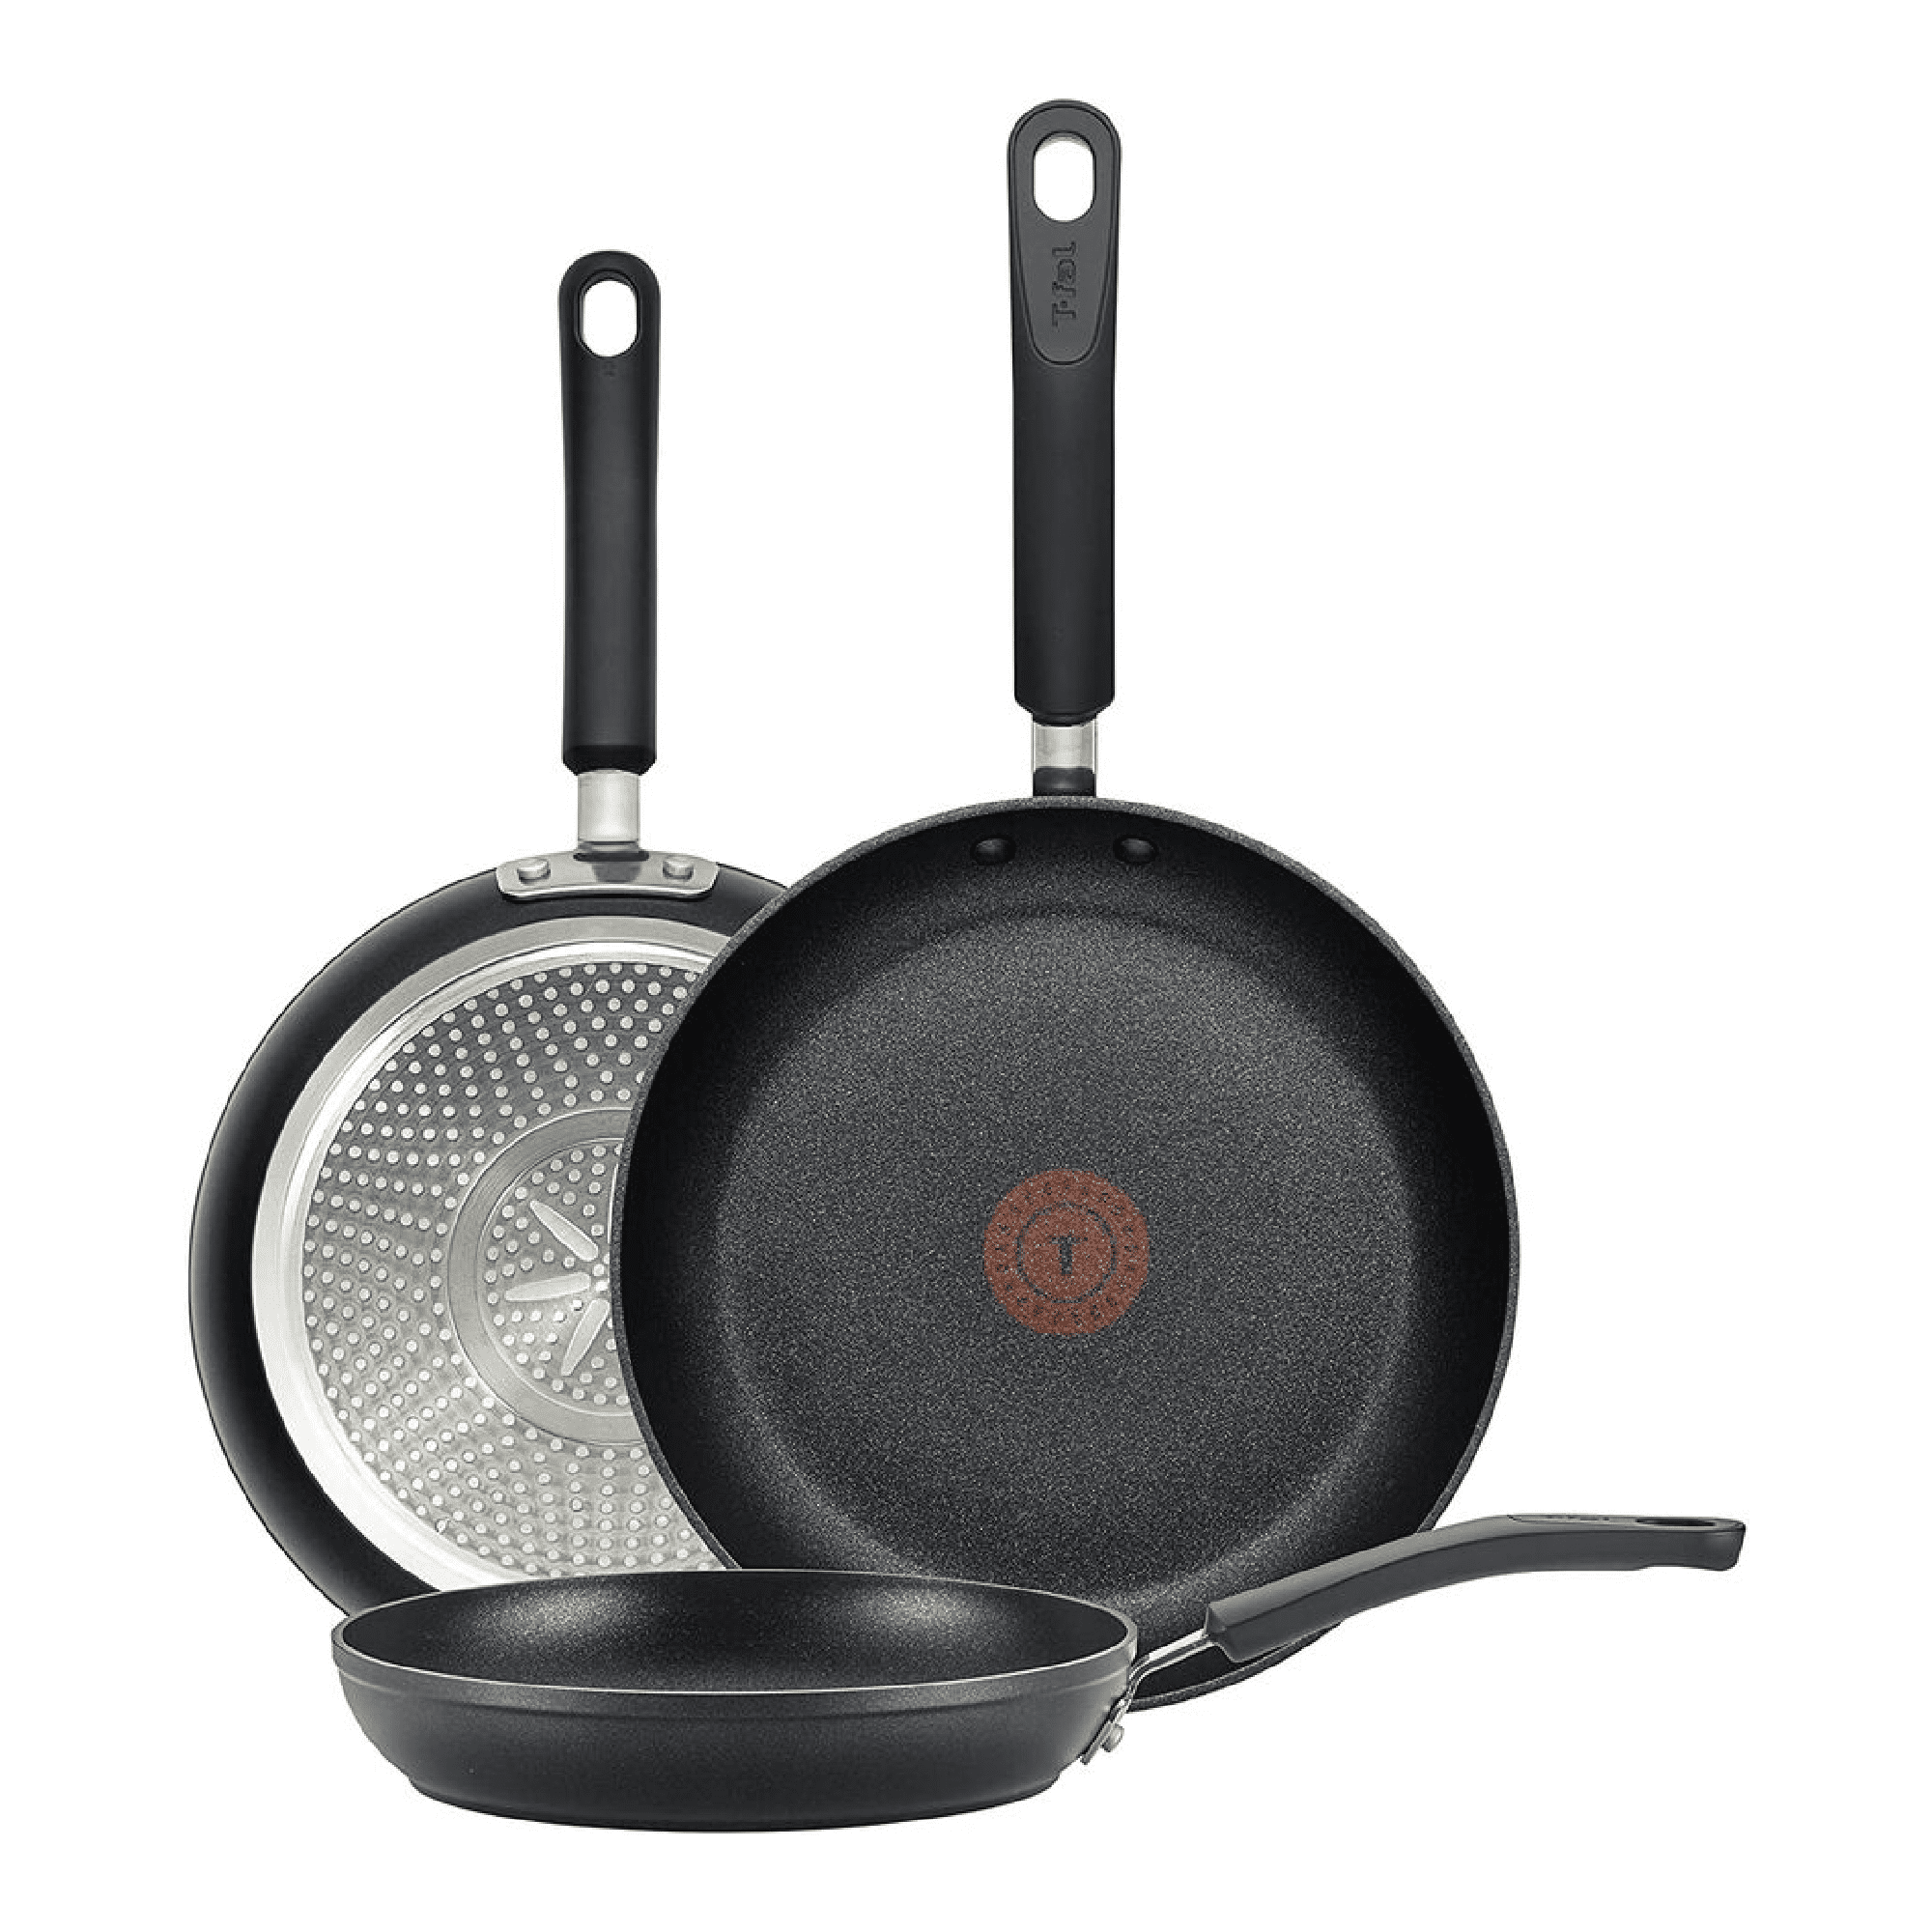 T-fal Nonstick 3 PC Fry Pan Cookware Set, 3-Pack(8-Inch,9.5-Inch,11-Inch),  Black